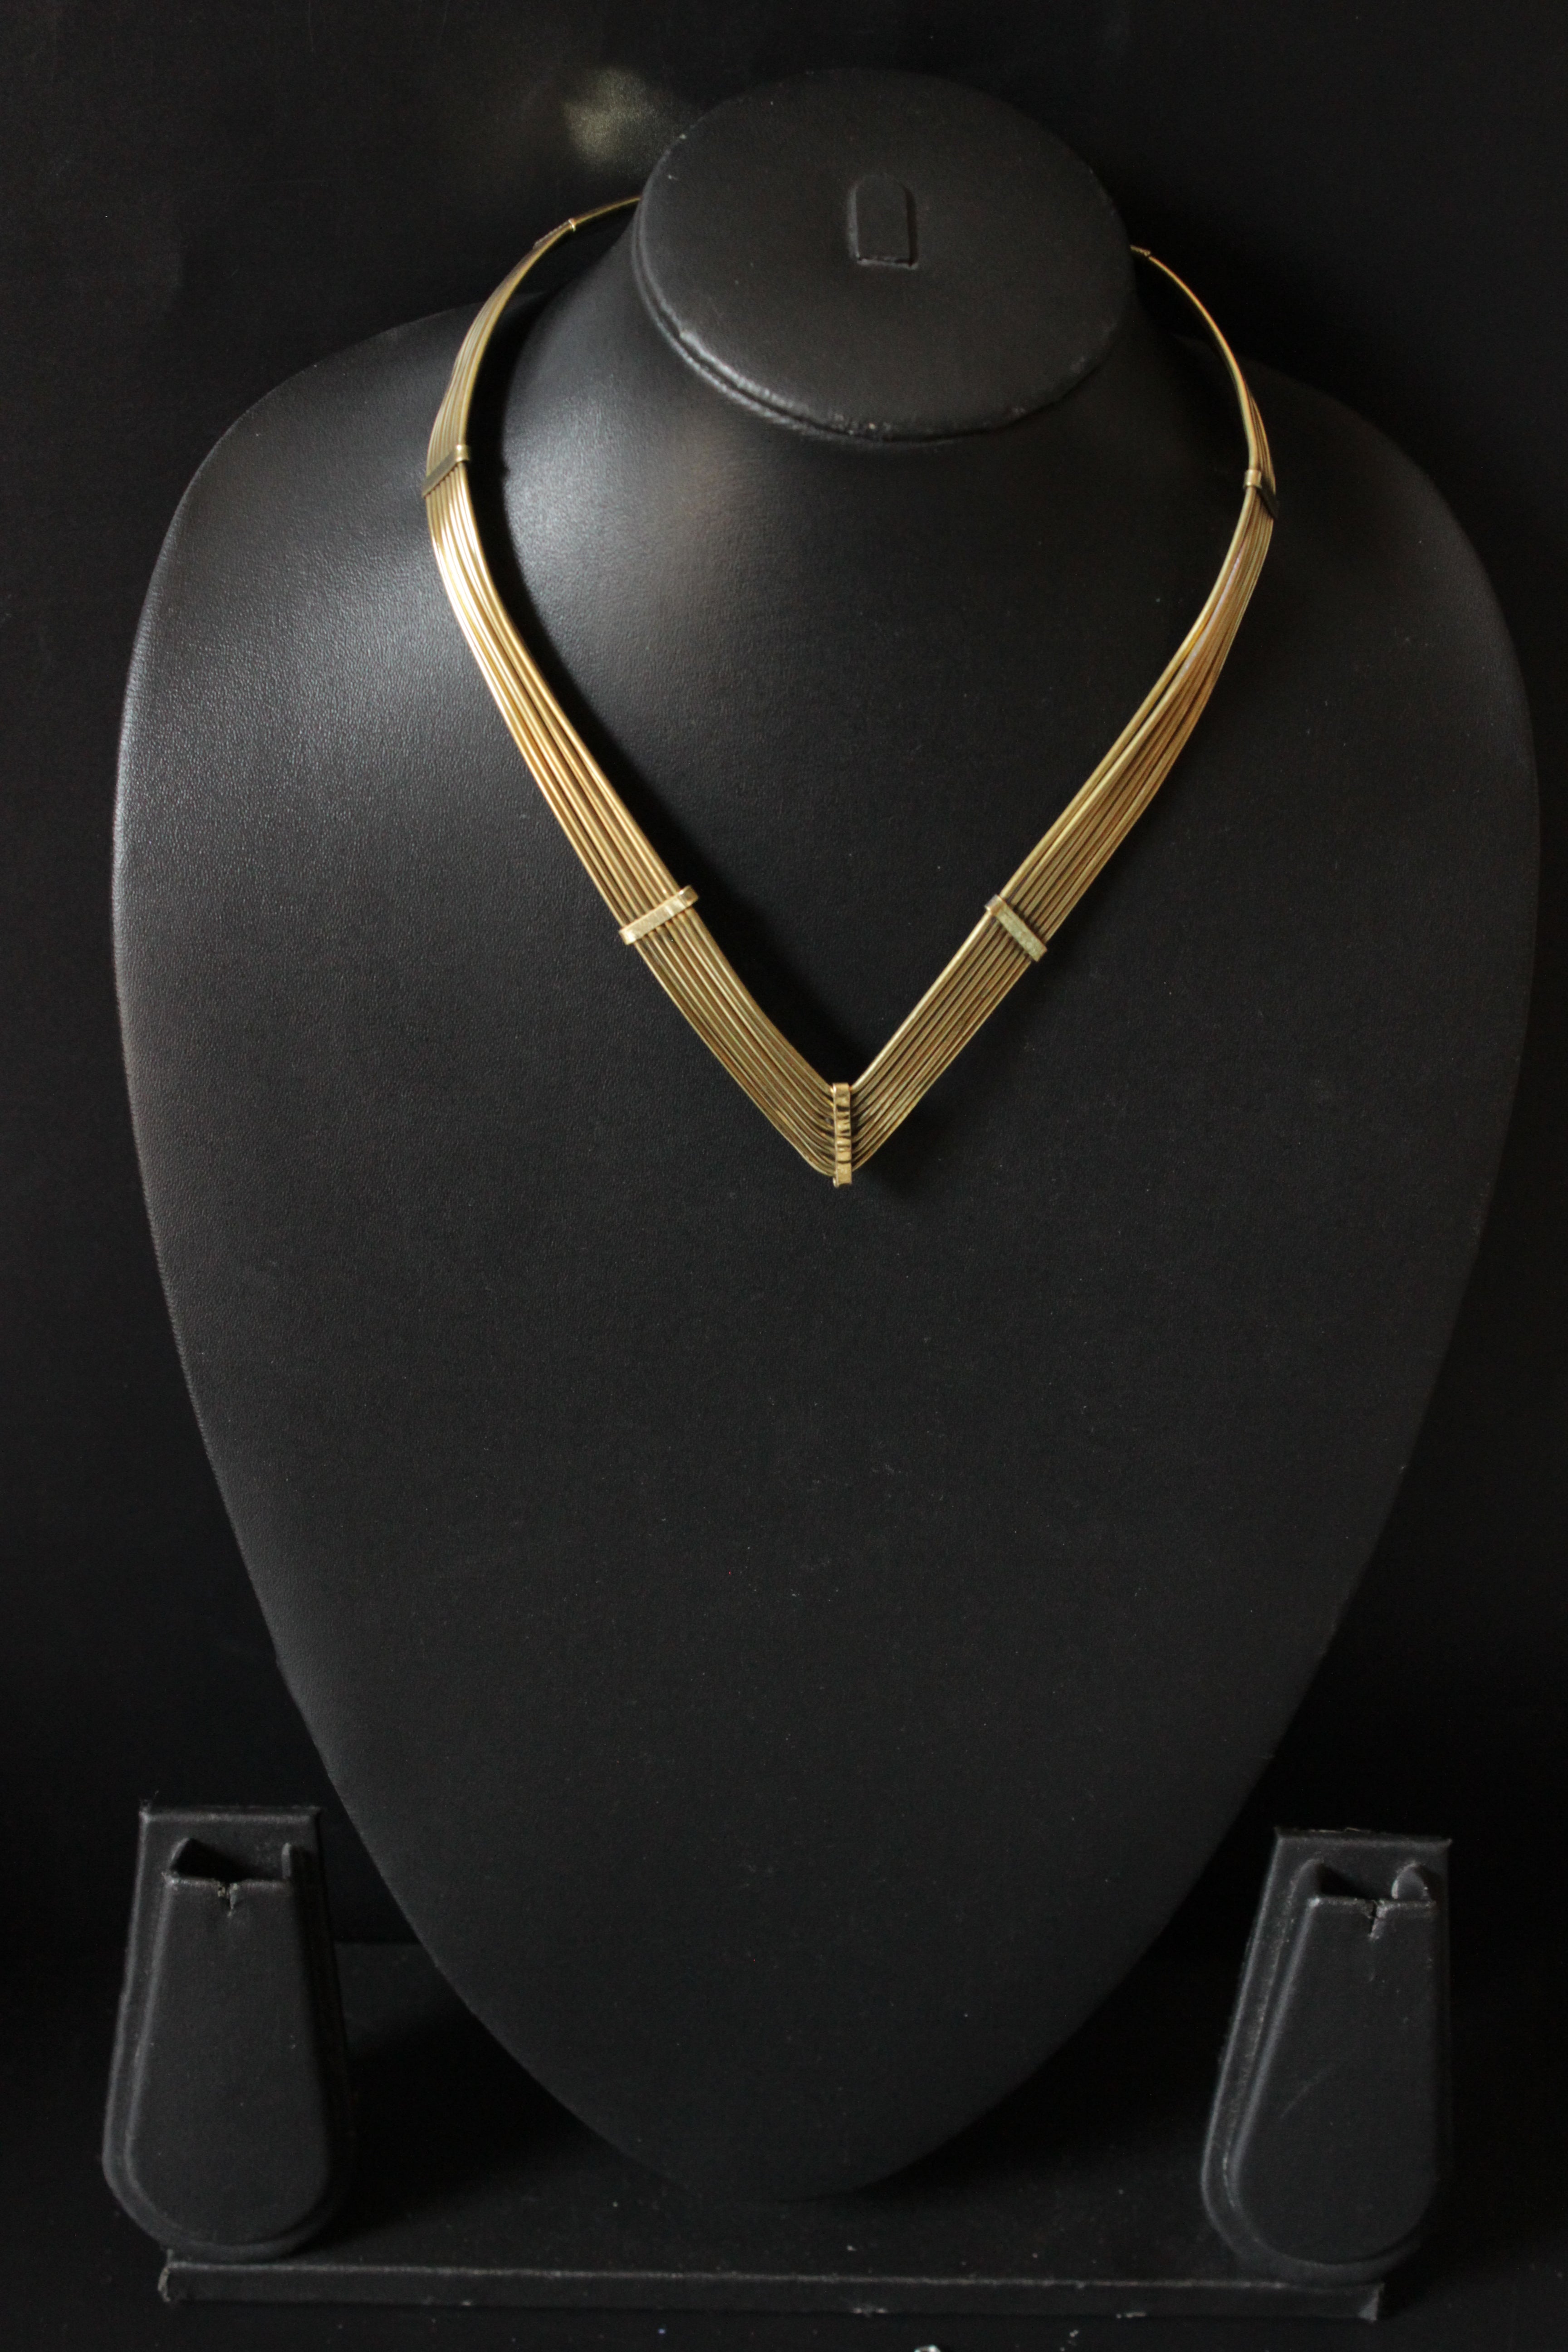 Handmade Gold Plated Necklace with Pendant | Swara Jewelry | U.S. made